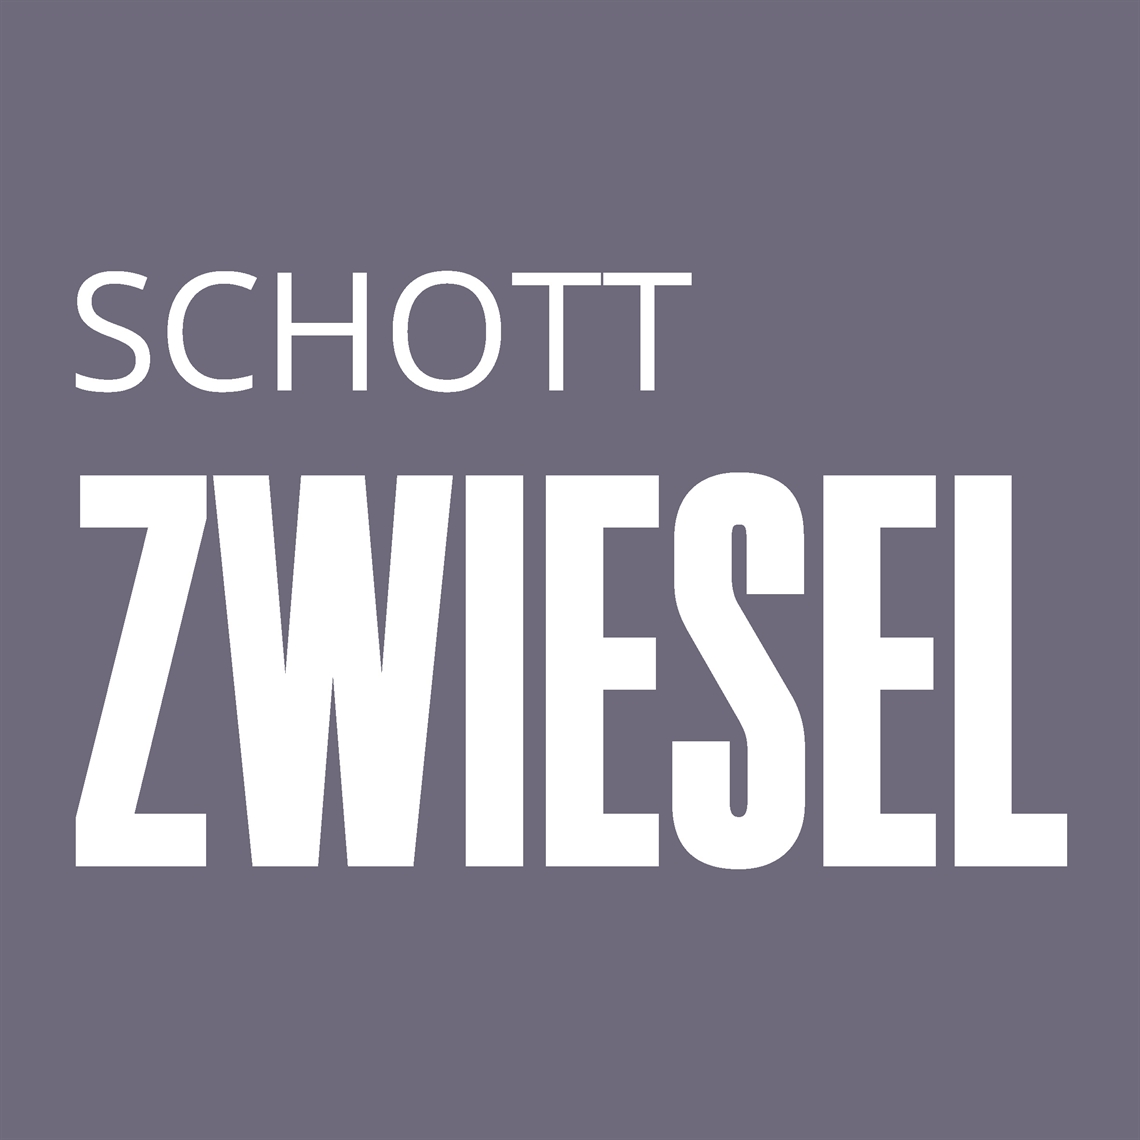 View our collection of Schott Zwiesel Whisky FAQs